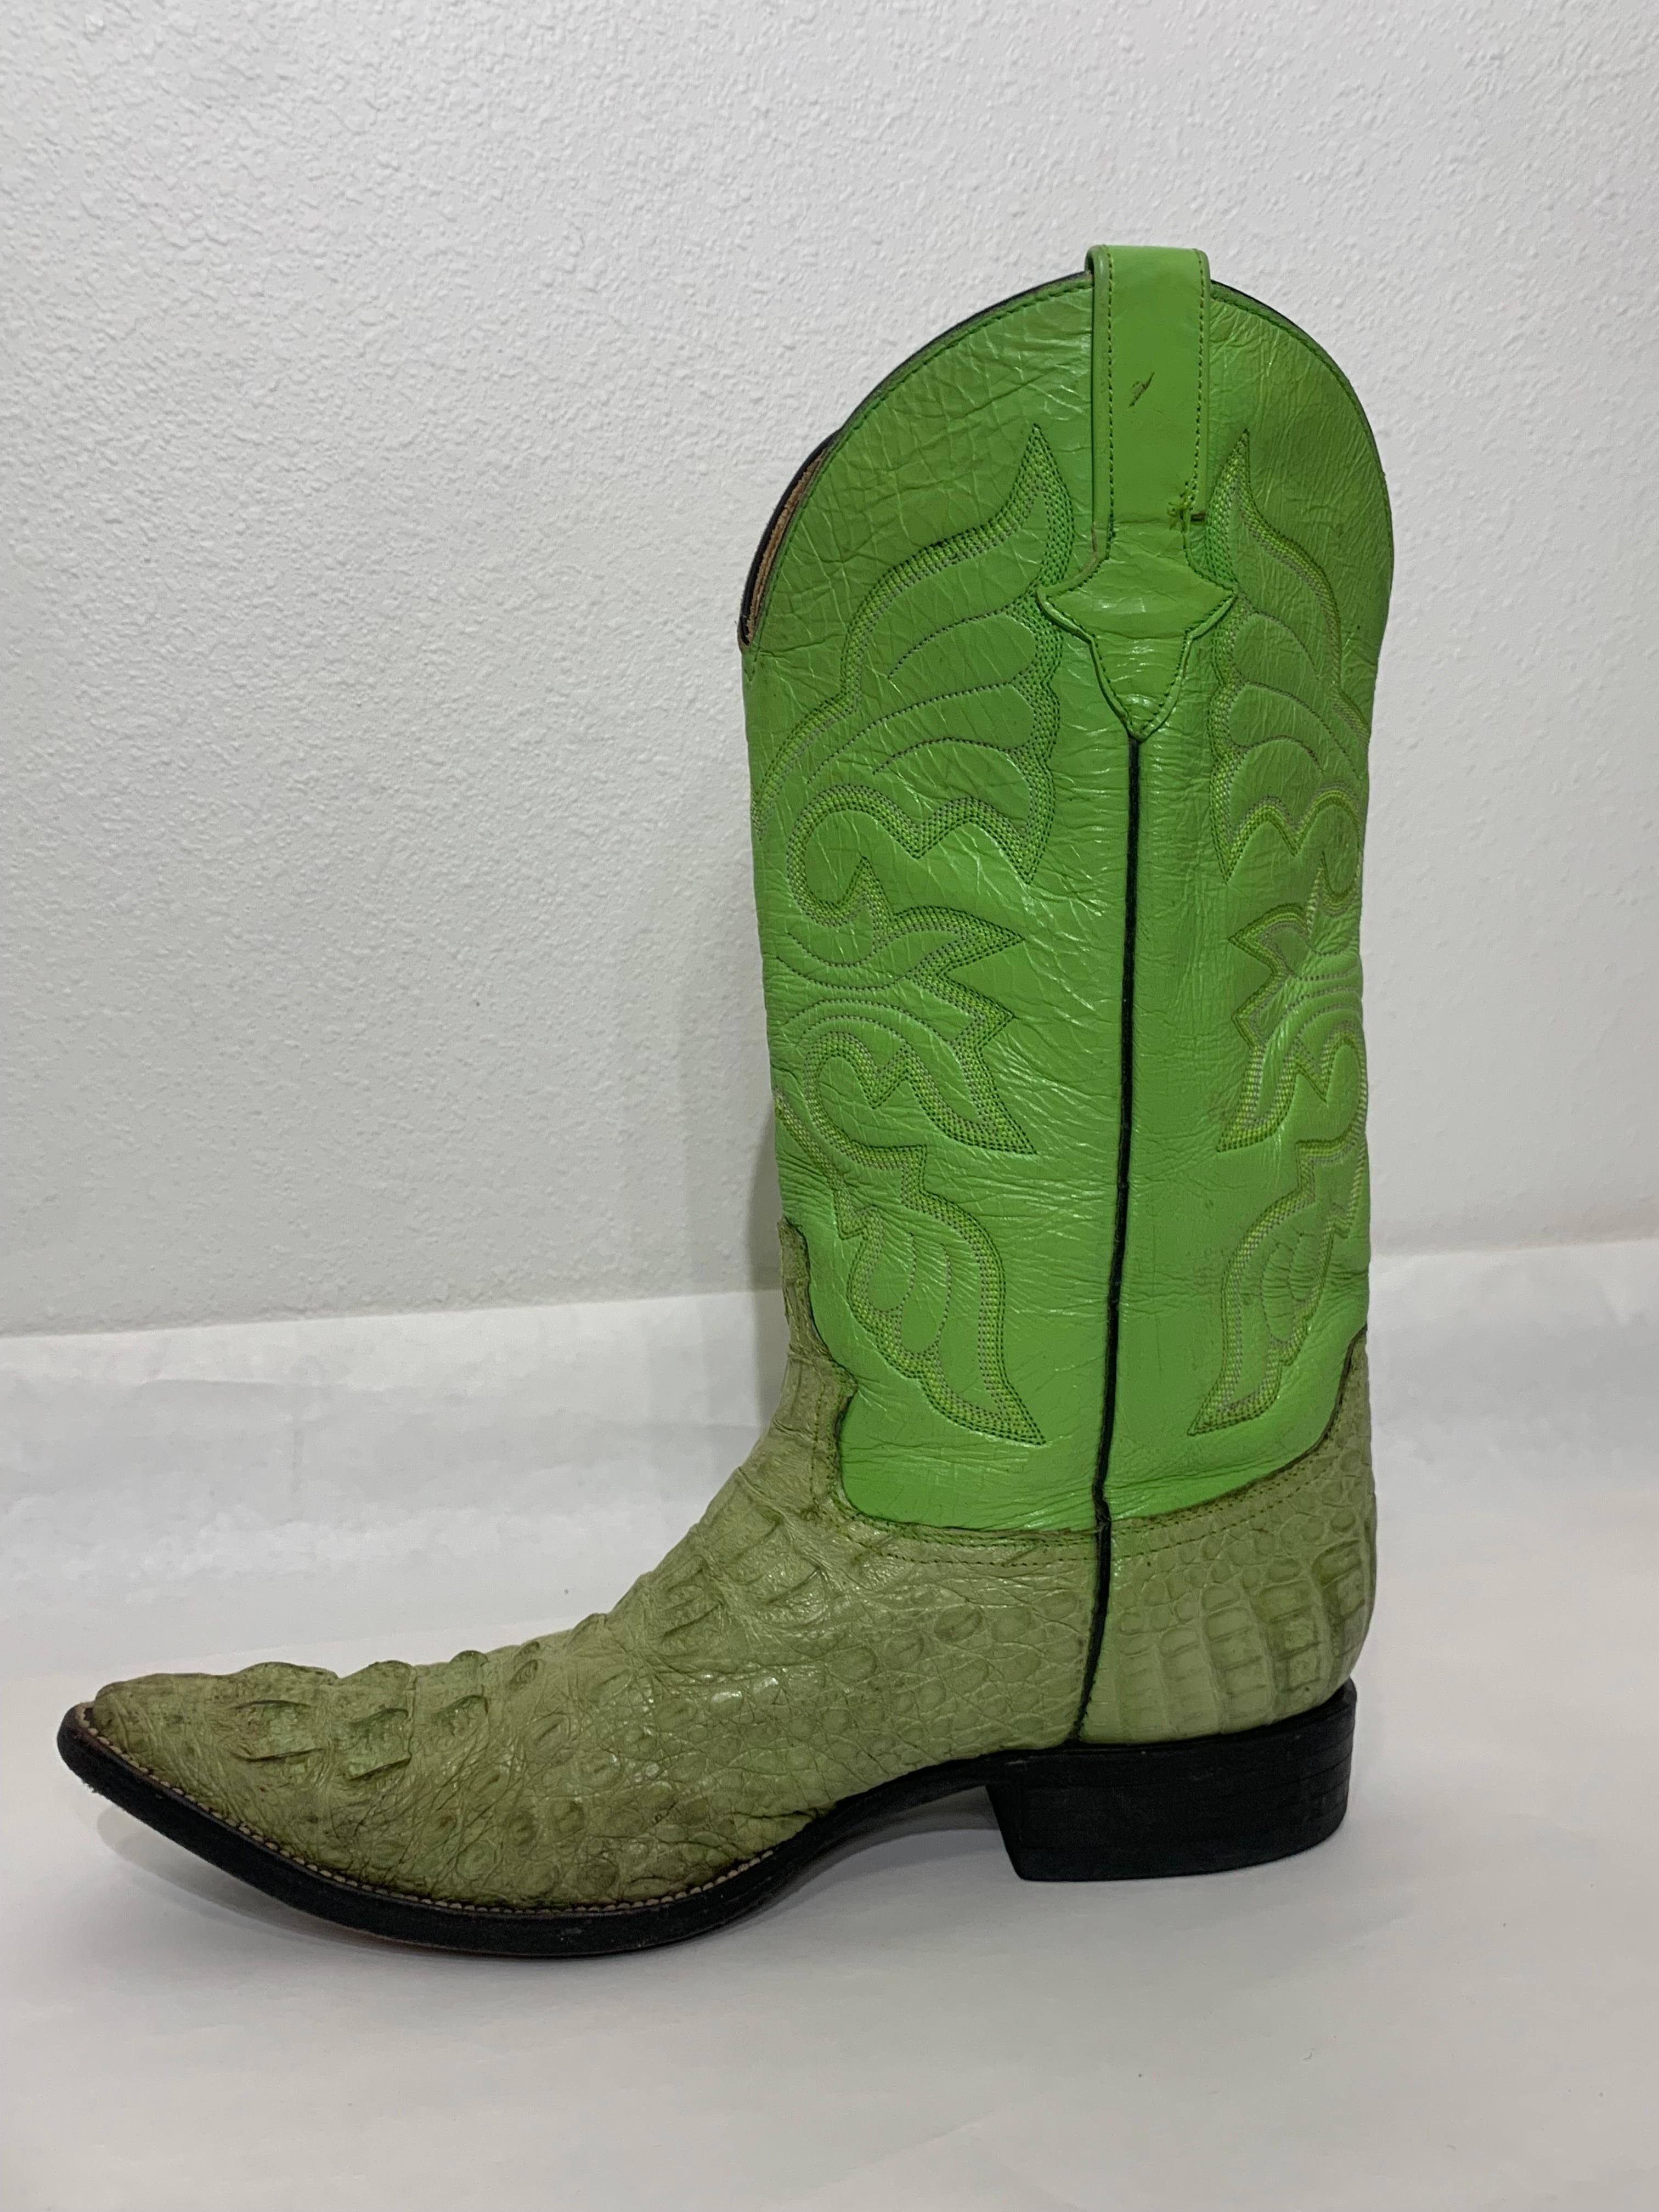 Gecko Green Leather & Crocodile Western Cowboy Boots US Size 8 For Sale 8